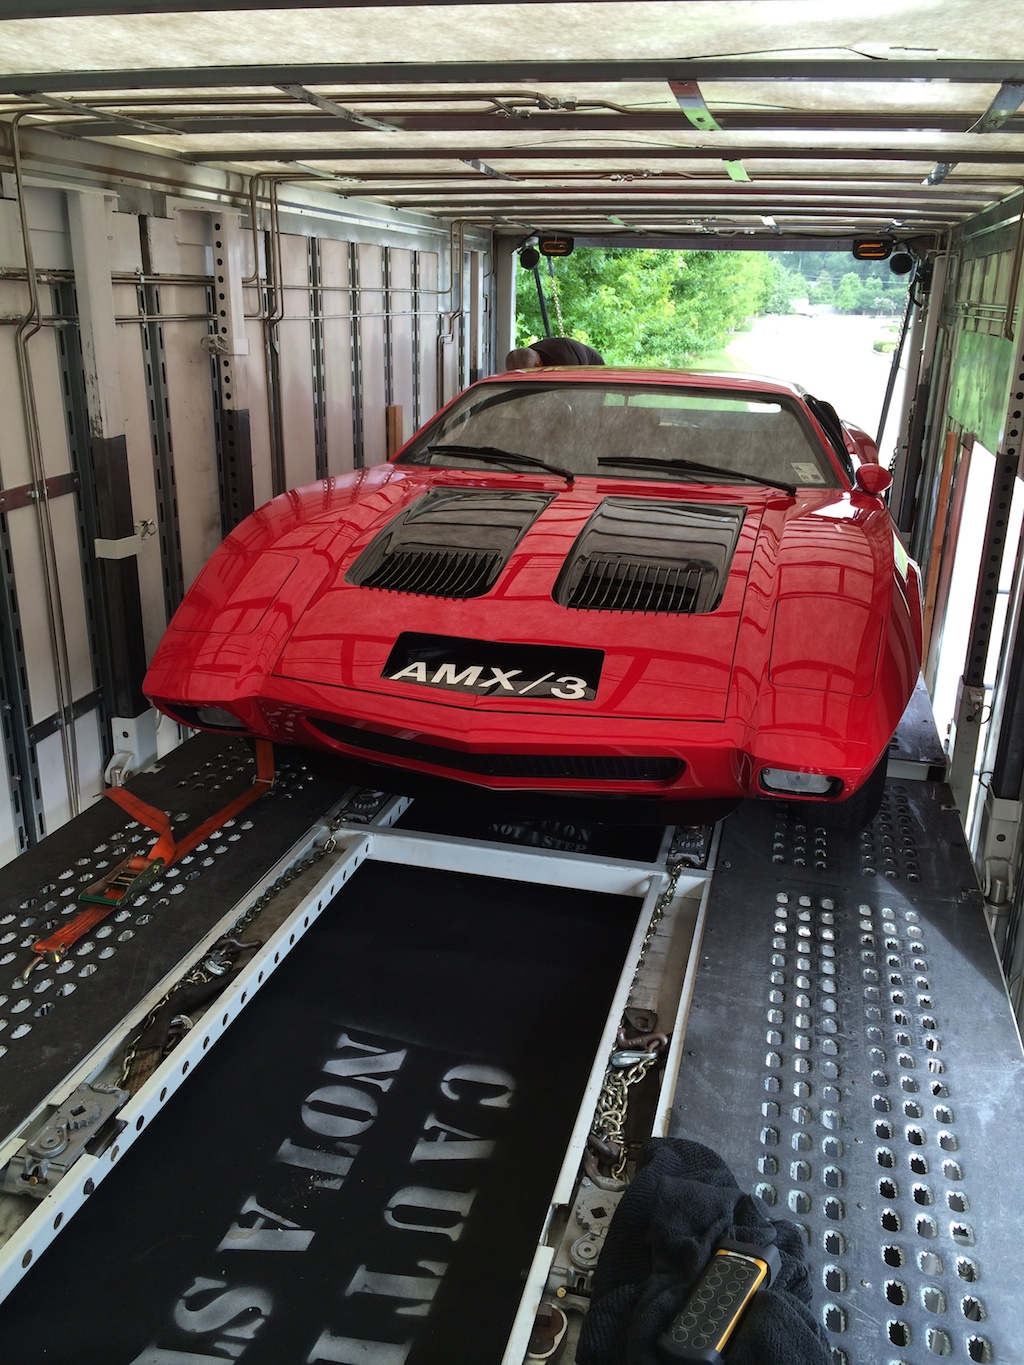 The AMC AMX/3 By Bizzarrini Is On It's Way To Germany!